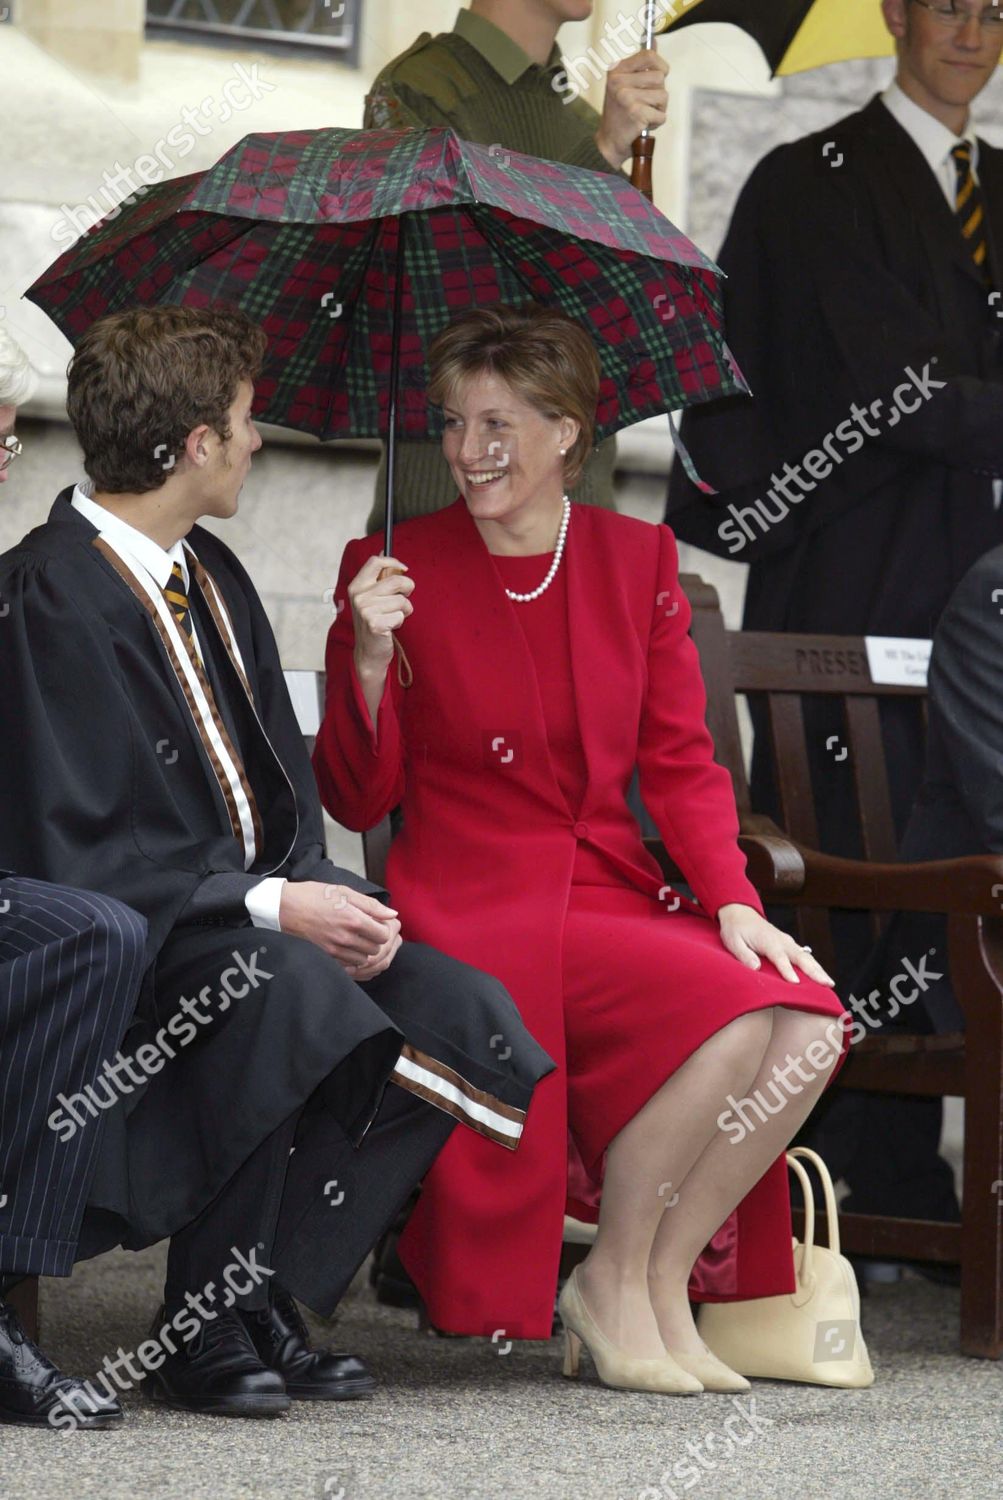 prince-edward-and-sophie-countess-of-wessex-visit-to-victoria-college-st-hellier-jersey-britain-shutterstock-editorial-391060k.jpg